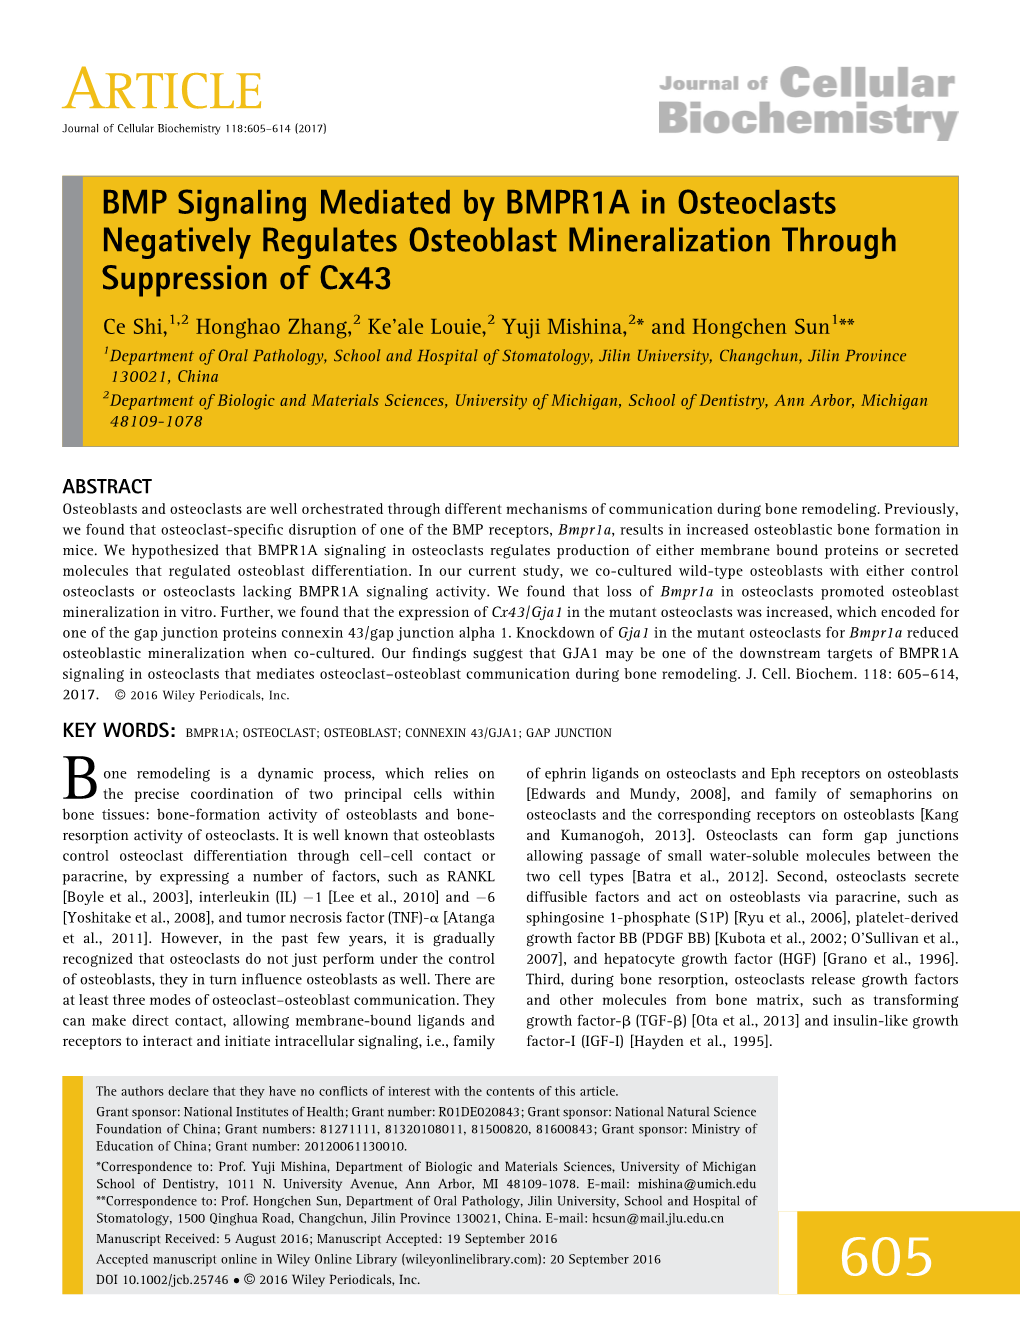 BMP Signaling Mediated by BMPR1A in Osteoclasts Negatively